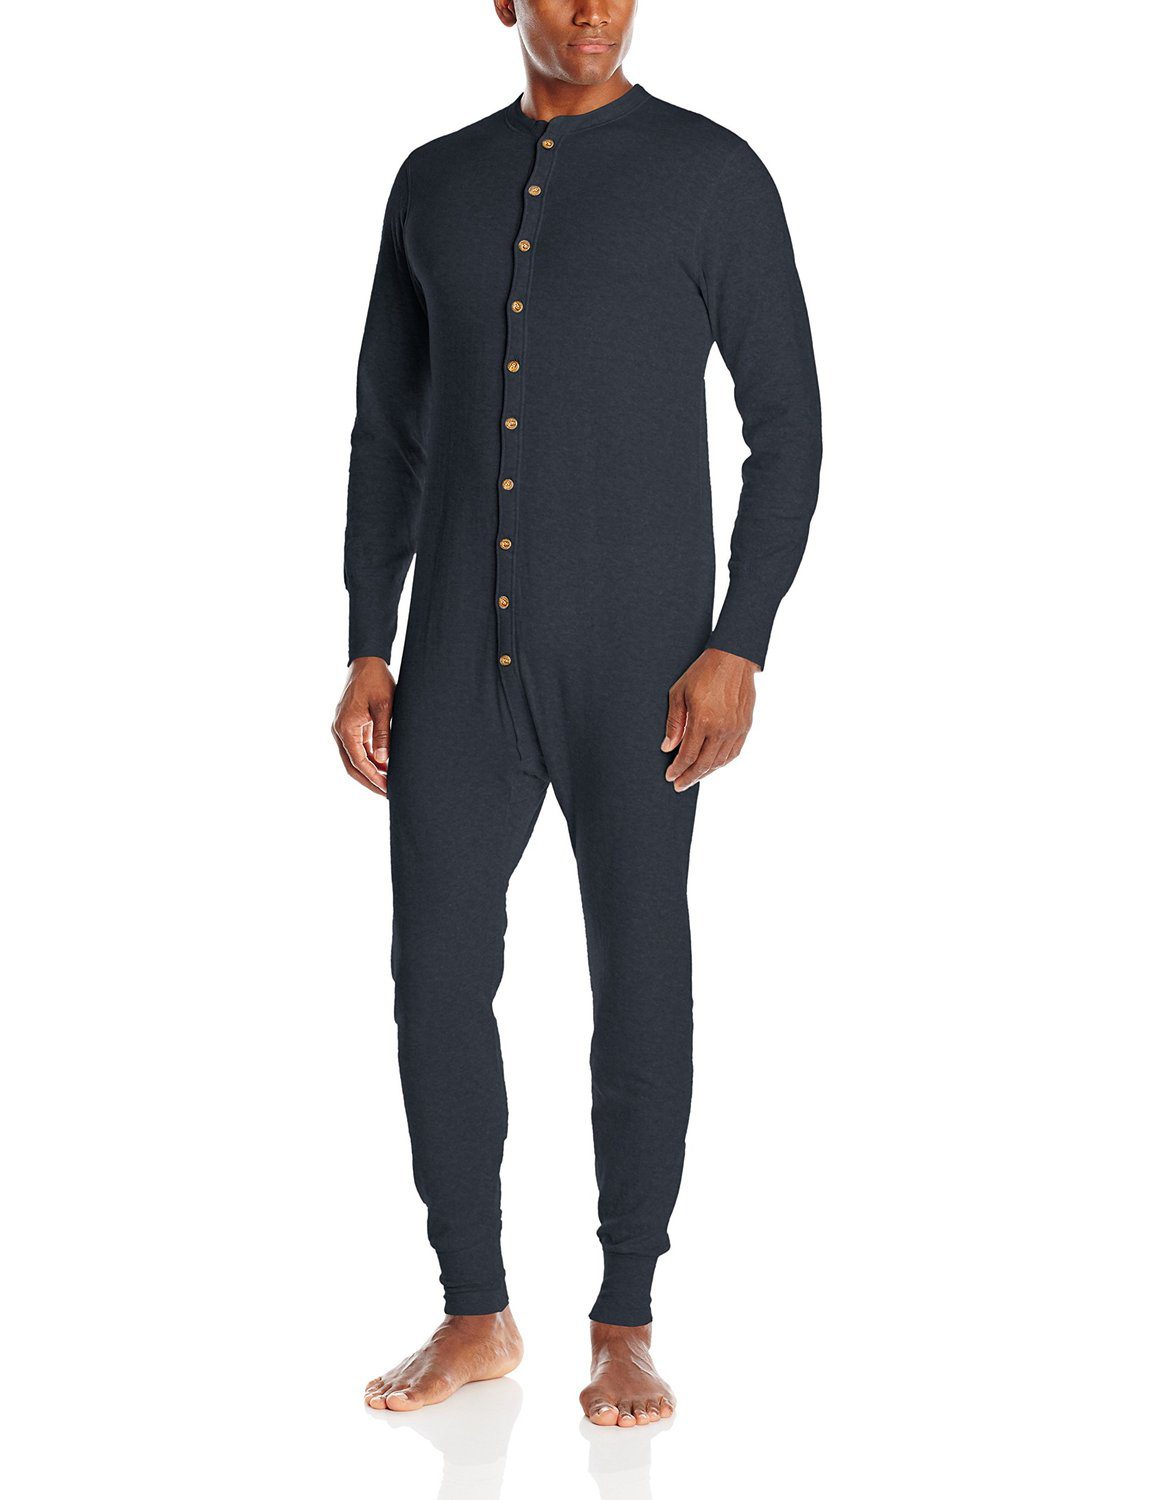 Duofold by Champion Mens Originals Wool-Blend Union Suit - Apparel